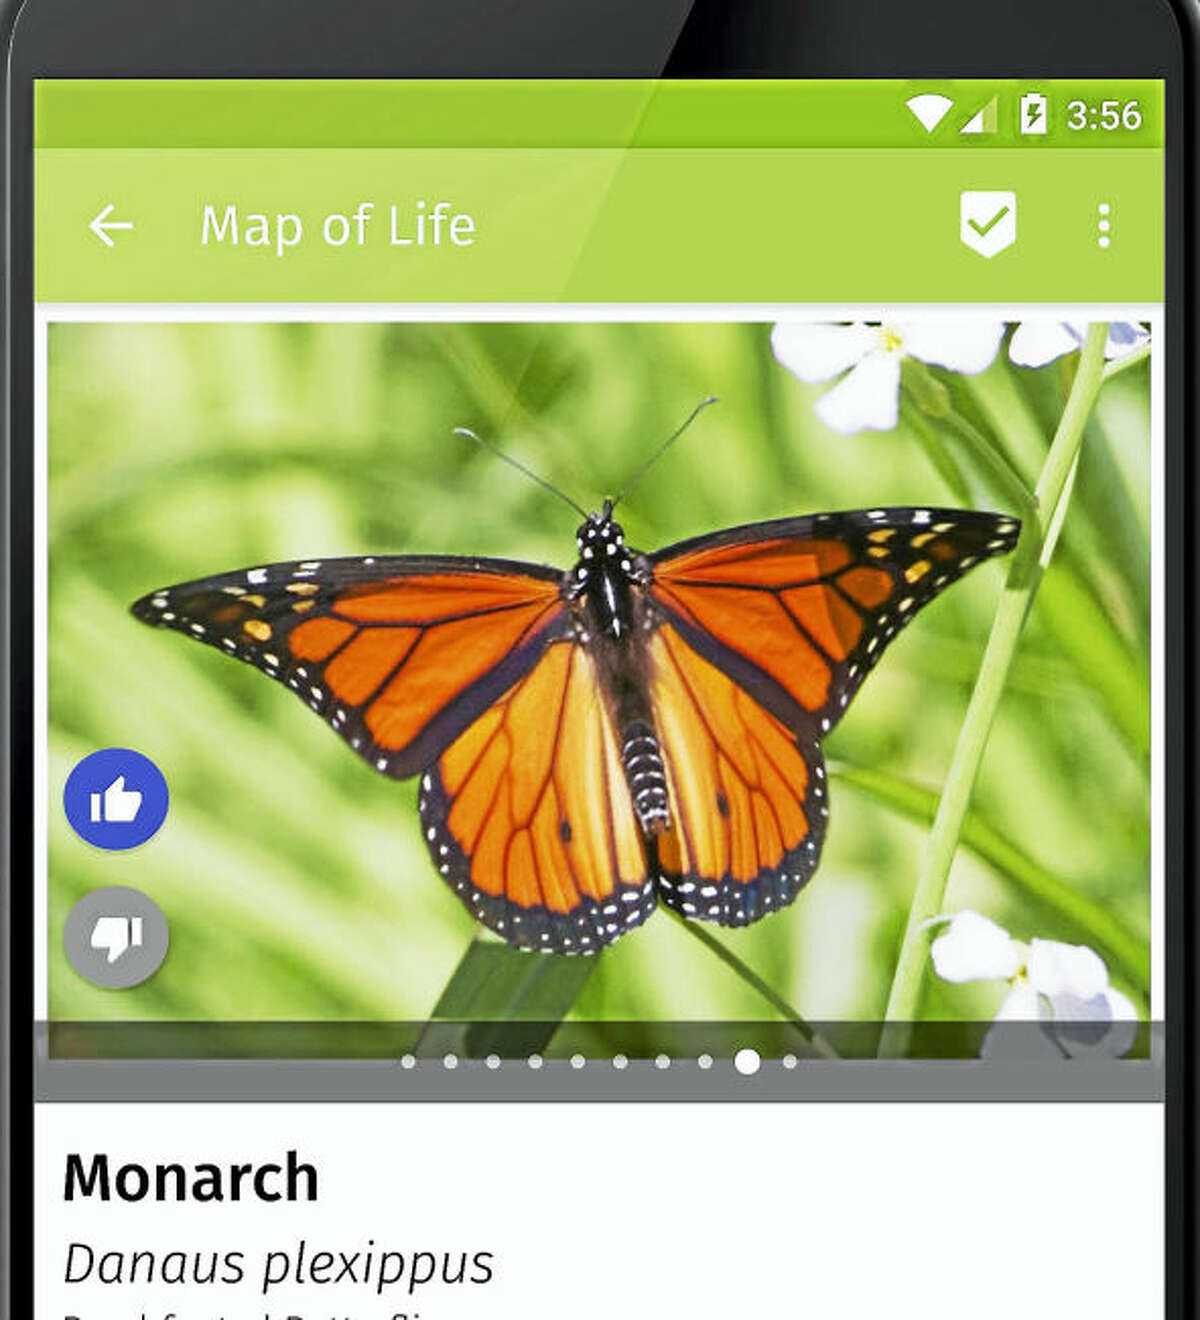 The Map of Life phone app